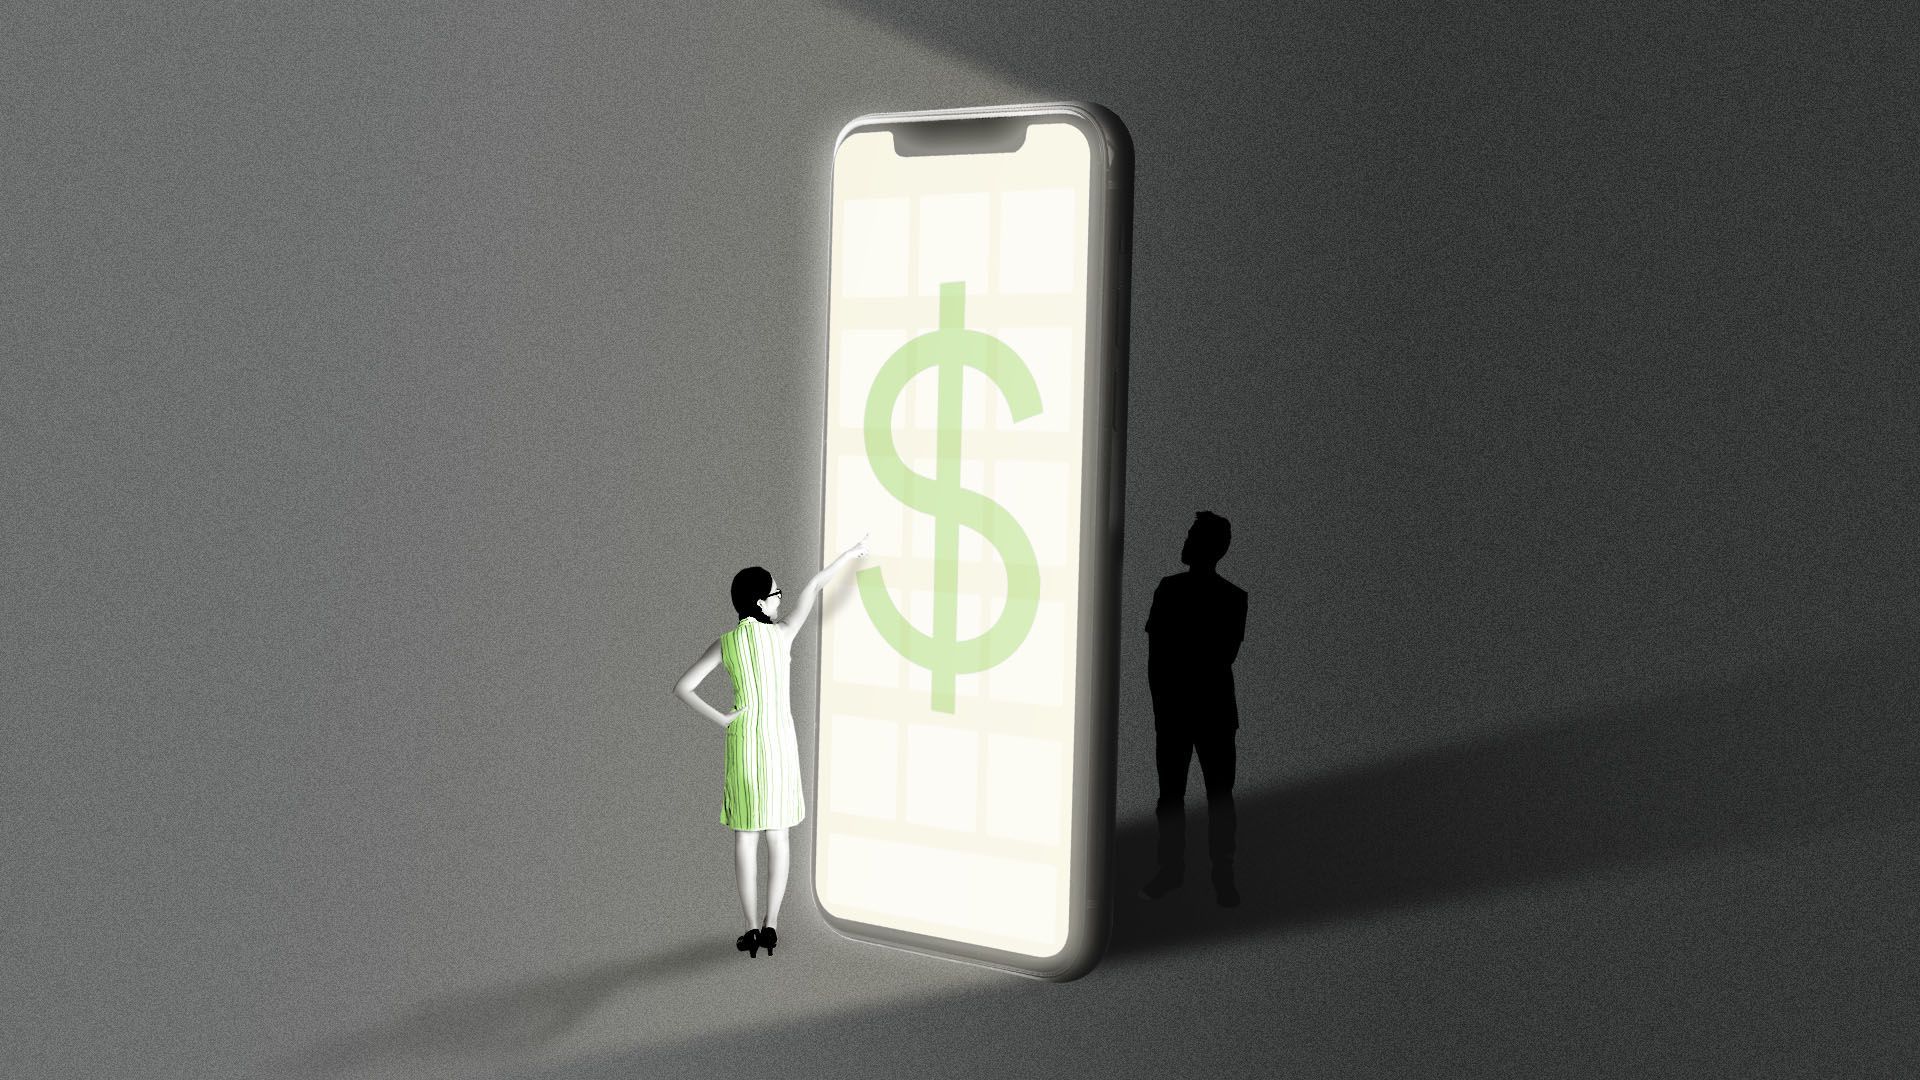 Illustration of a small person at a giant iphone screen with a dollar bill on it, and a person behind the iphone in the dark